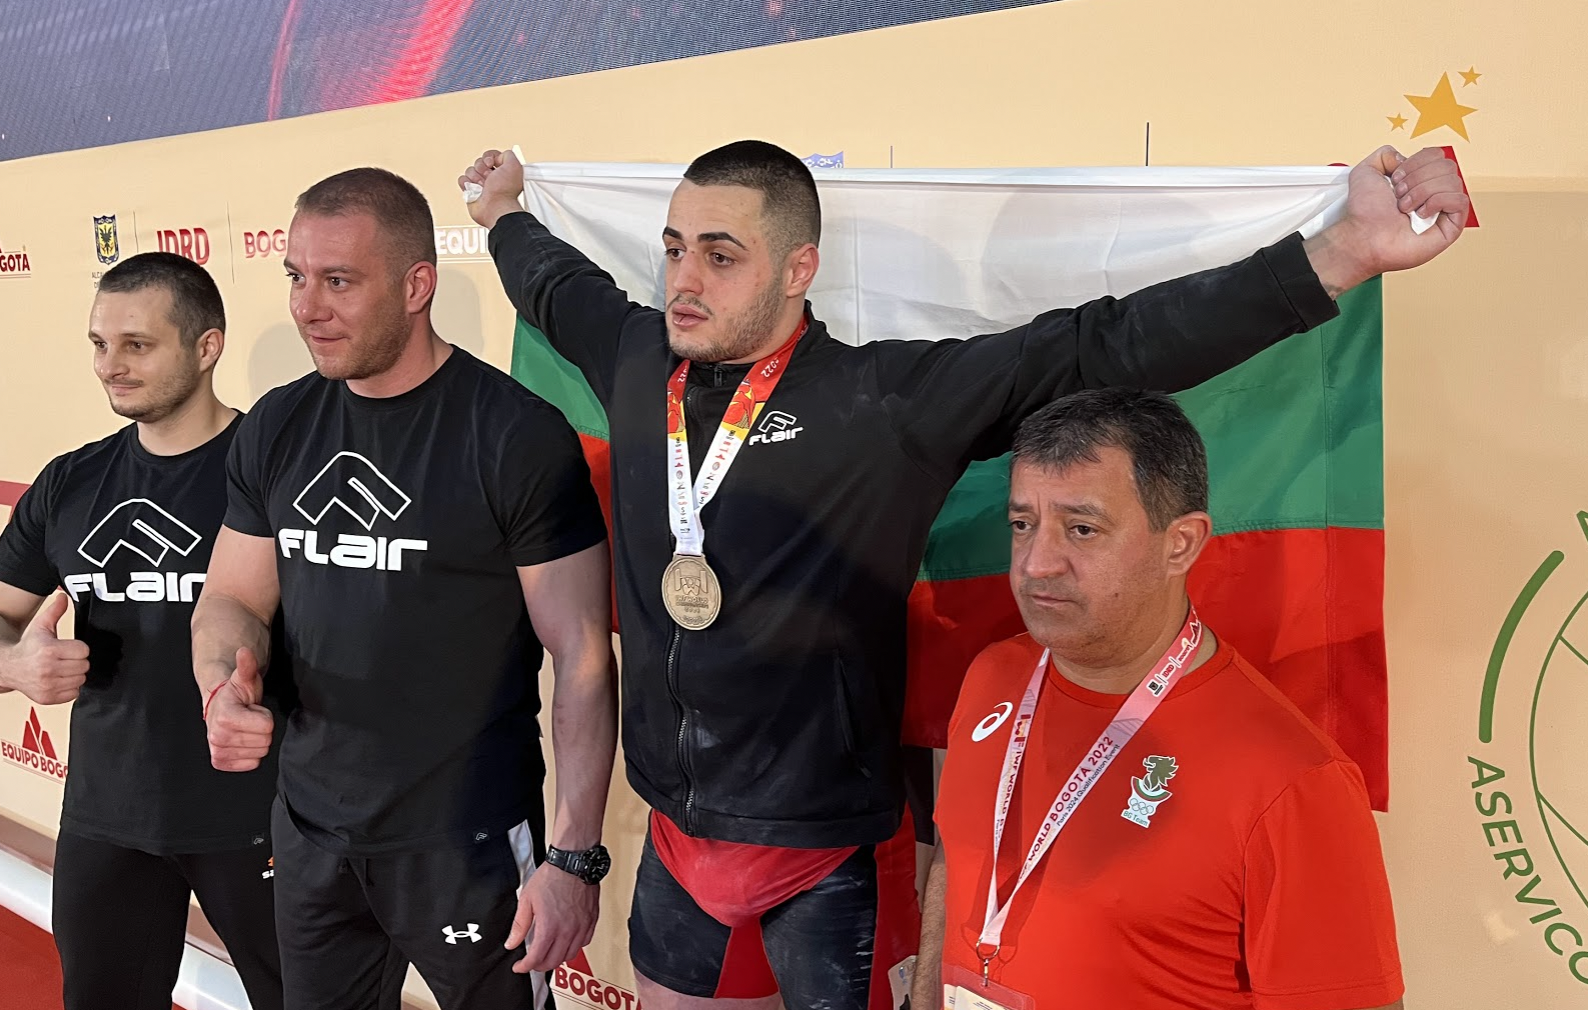 Suspended prison sentence leaves star Bulgarian weightlifter Nasar clear for Paris 2024 quest